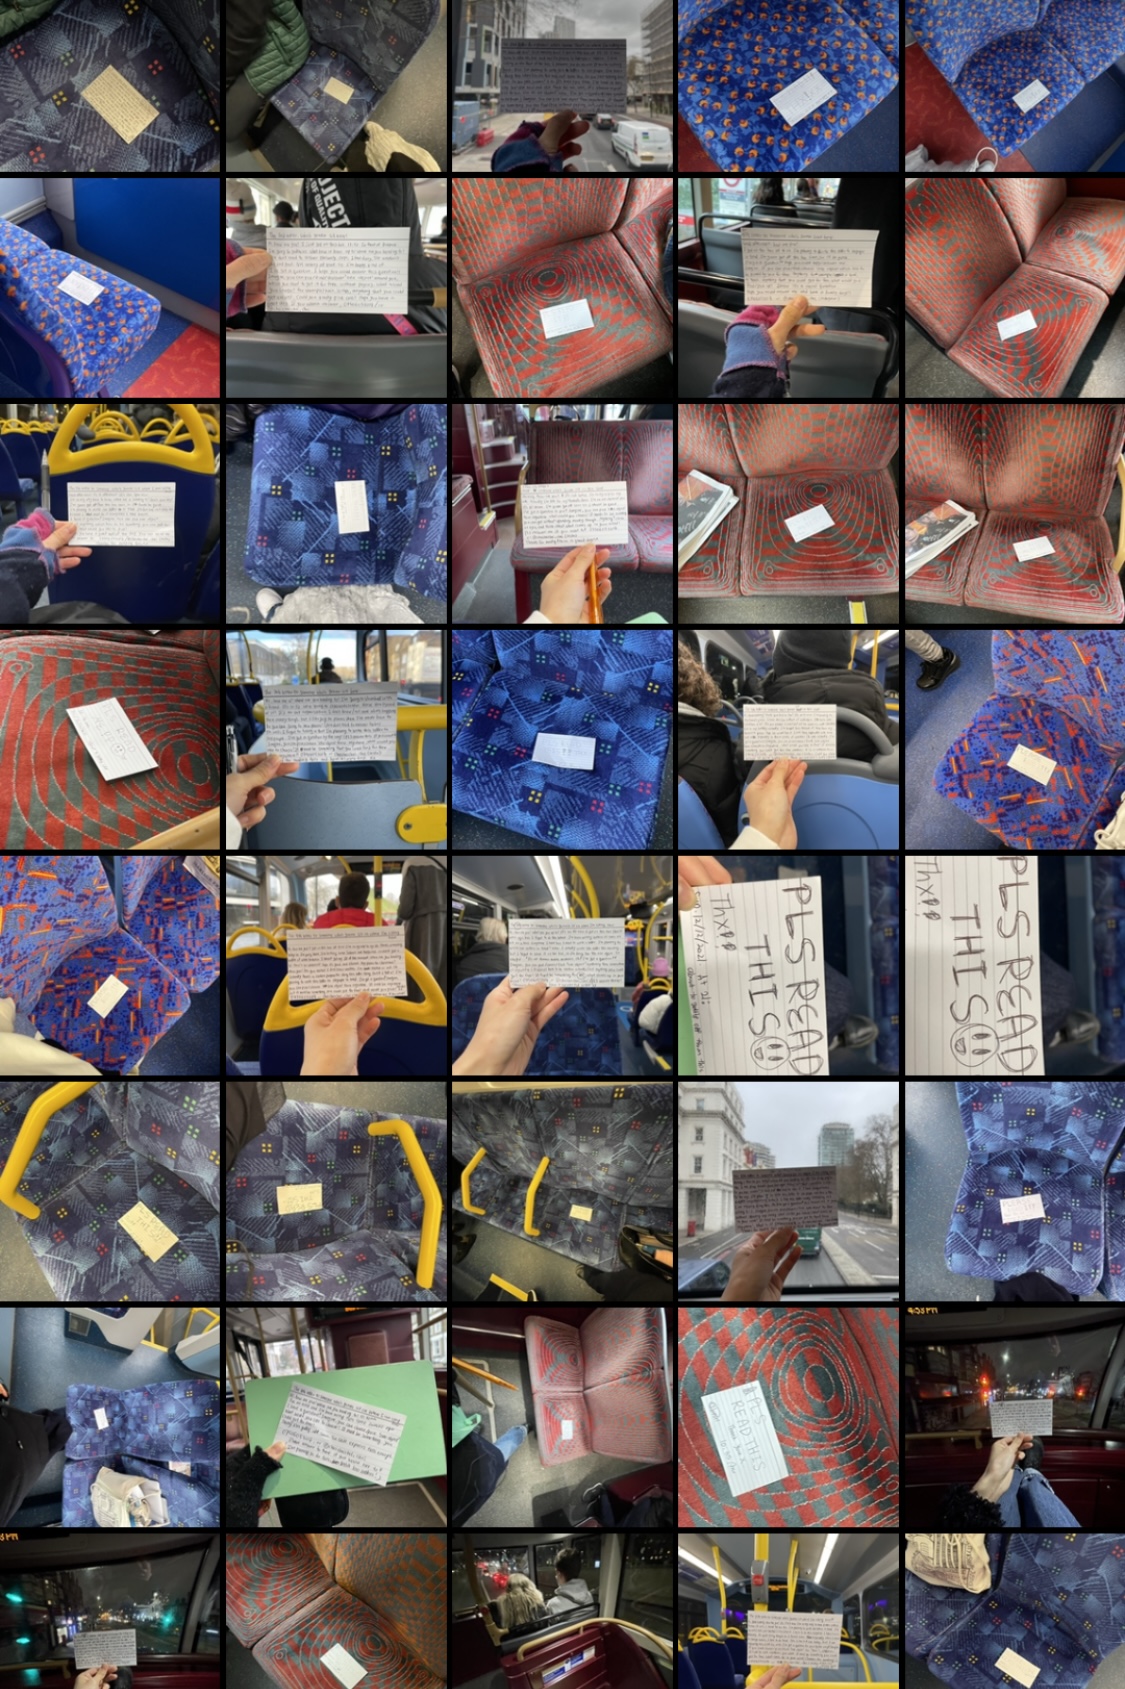  Many photos of a flash card on various bus seats.